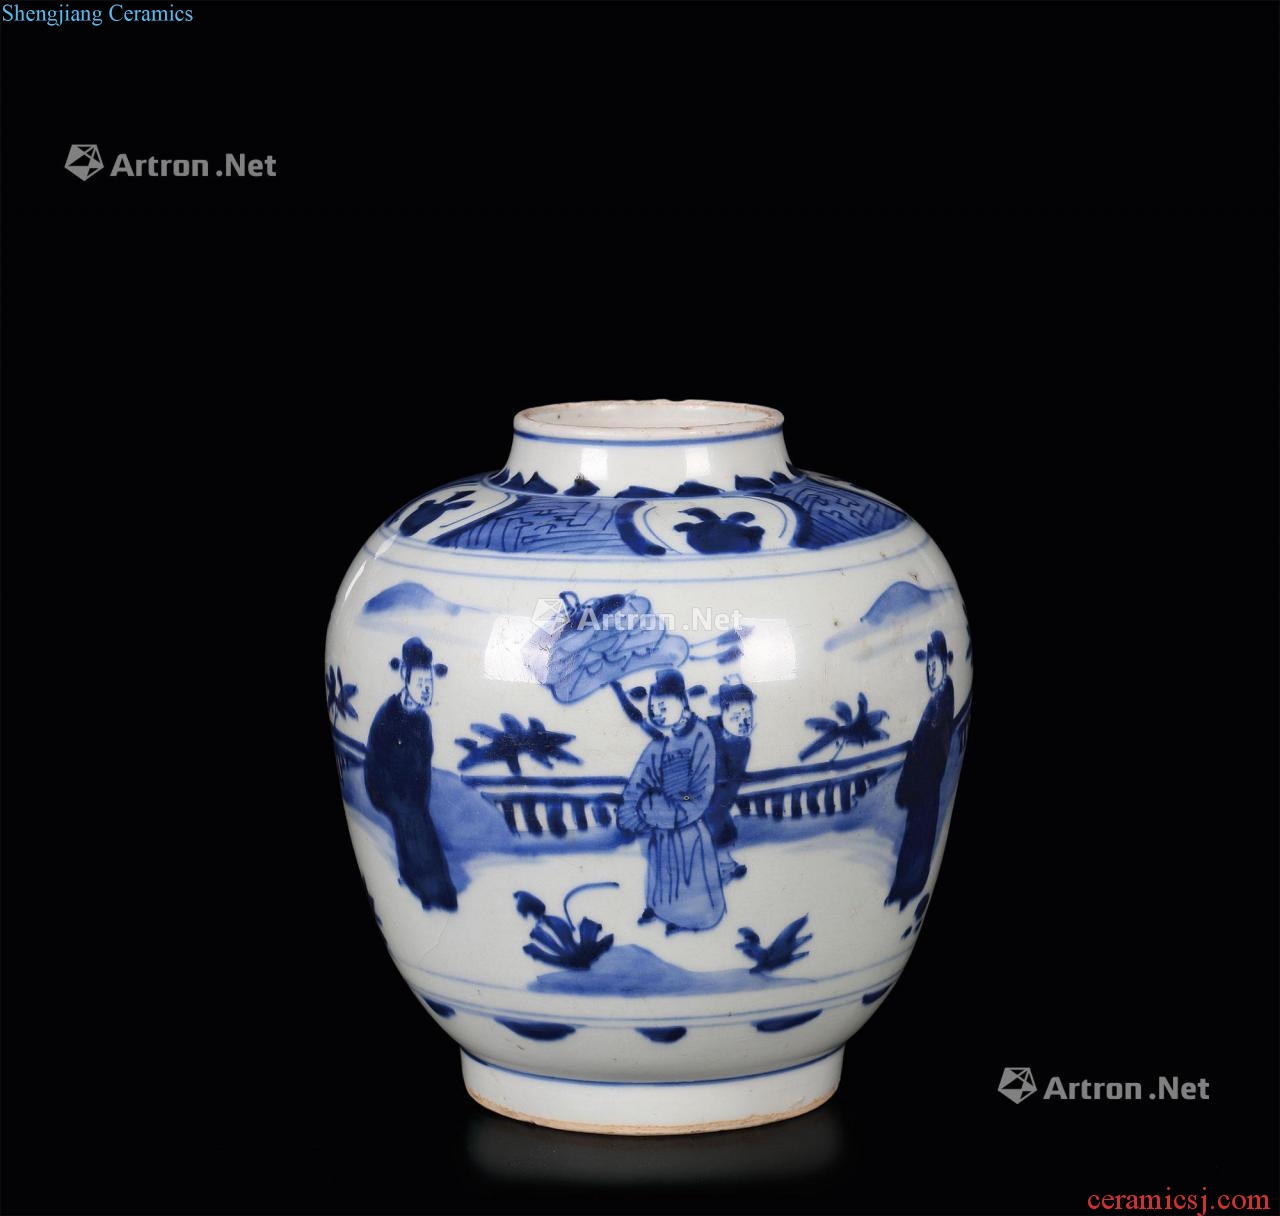 The stories of Ming dynasty blue and white lanterns cans